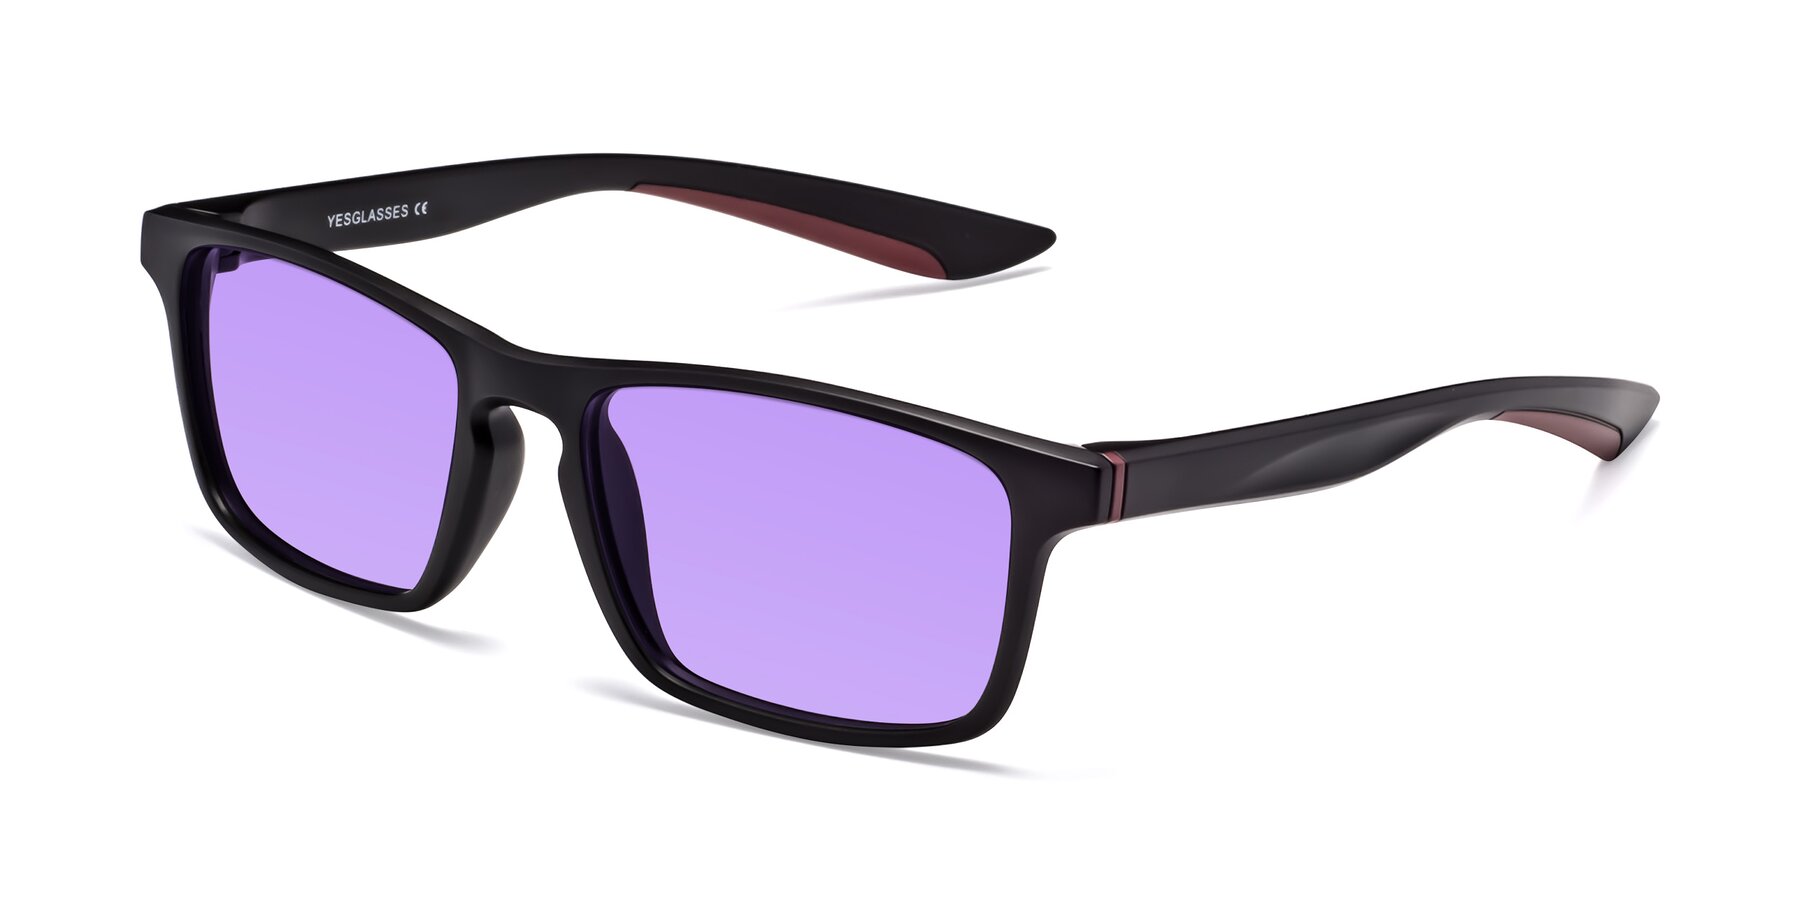 Angle of Passion in Matte Black-Wine with Medium Purple Tinted Lenses